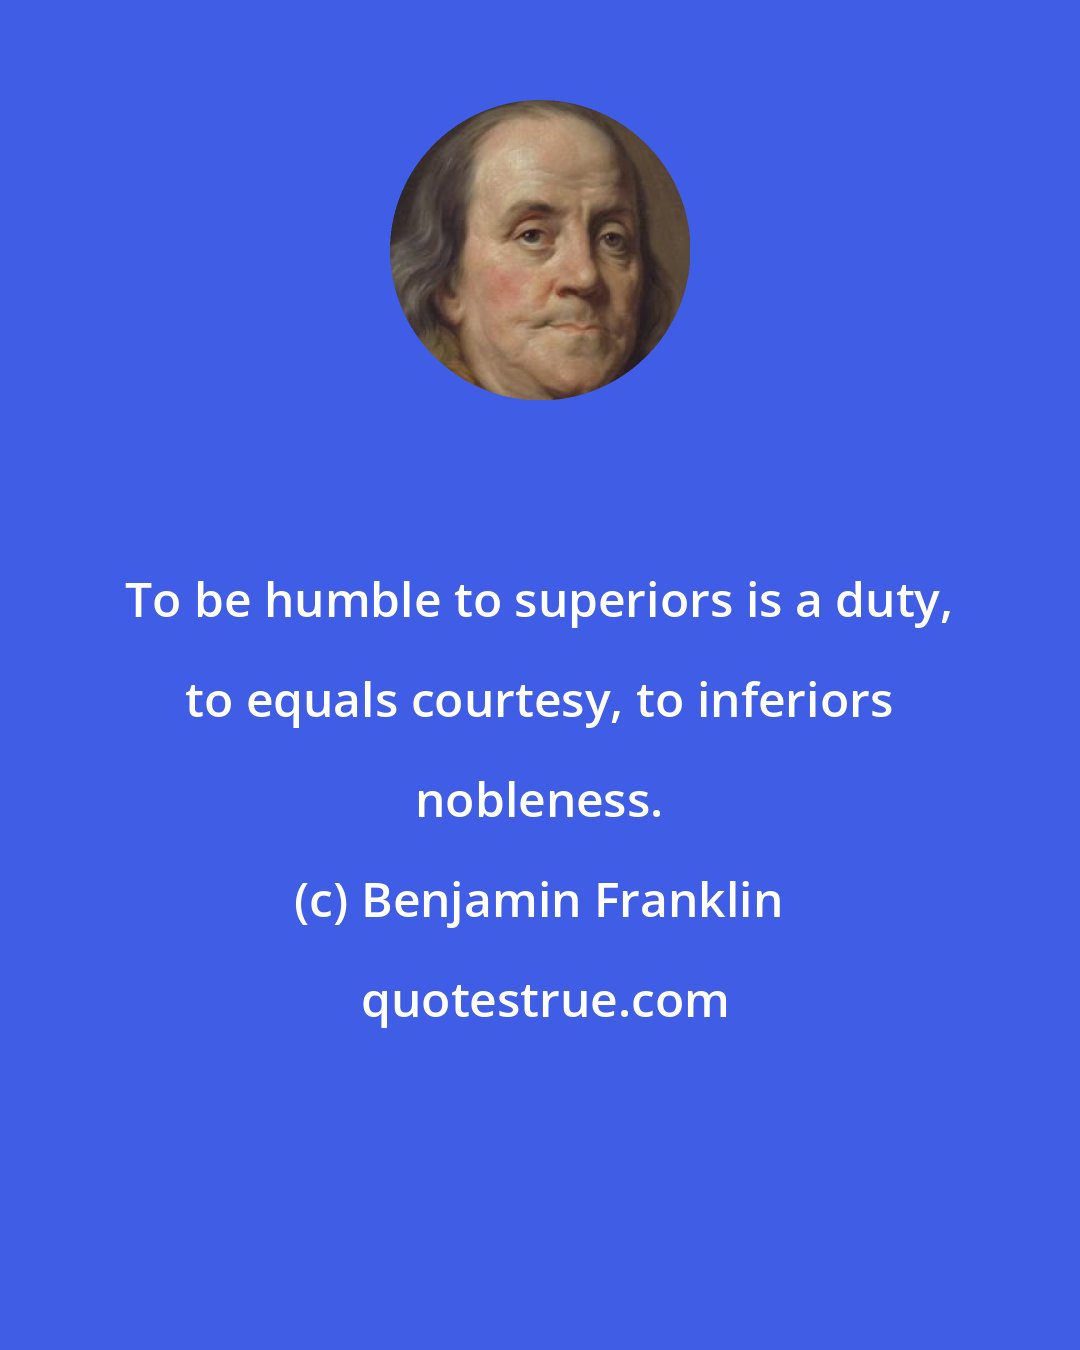 Benjamin Franklin: To be humble to superiors is a duty, to equals courtesy, to inferiors nobleness.